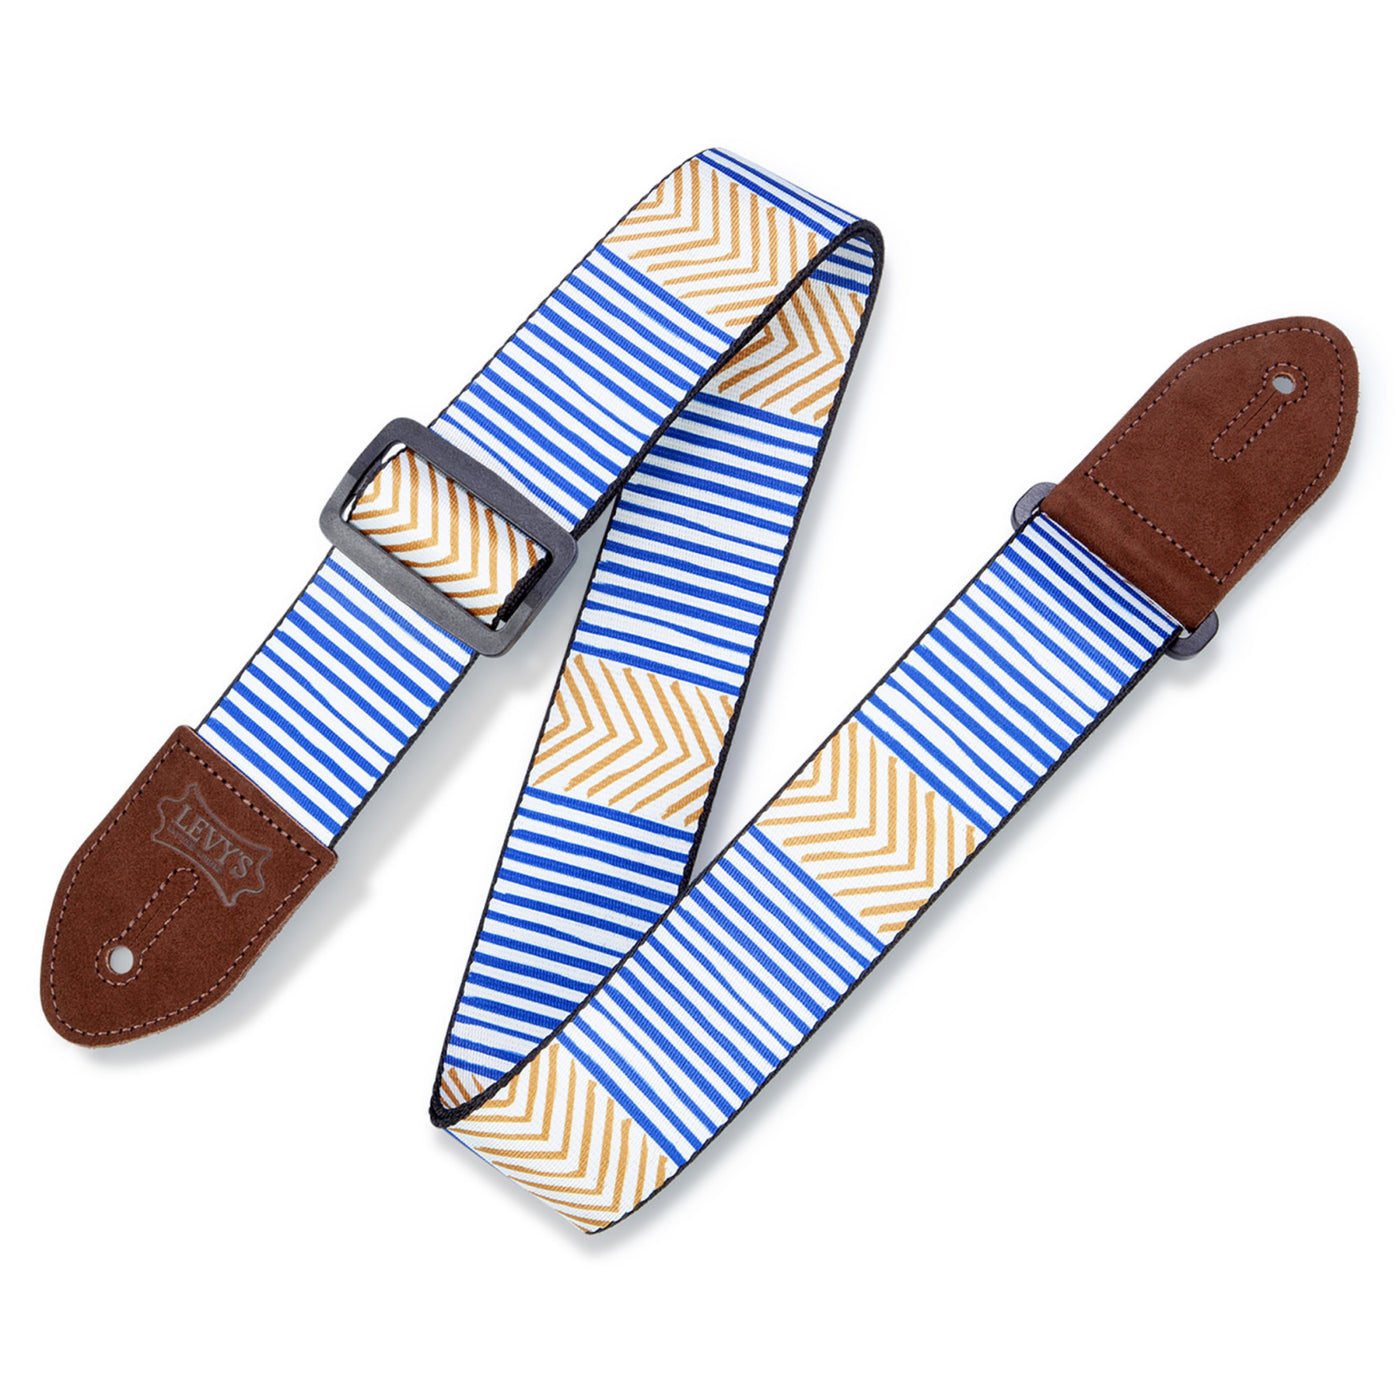 Levy's 2" Print Strap in Tribal Chevron - White, Blue and Gold